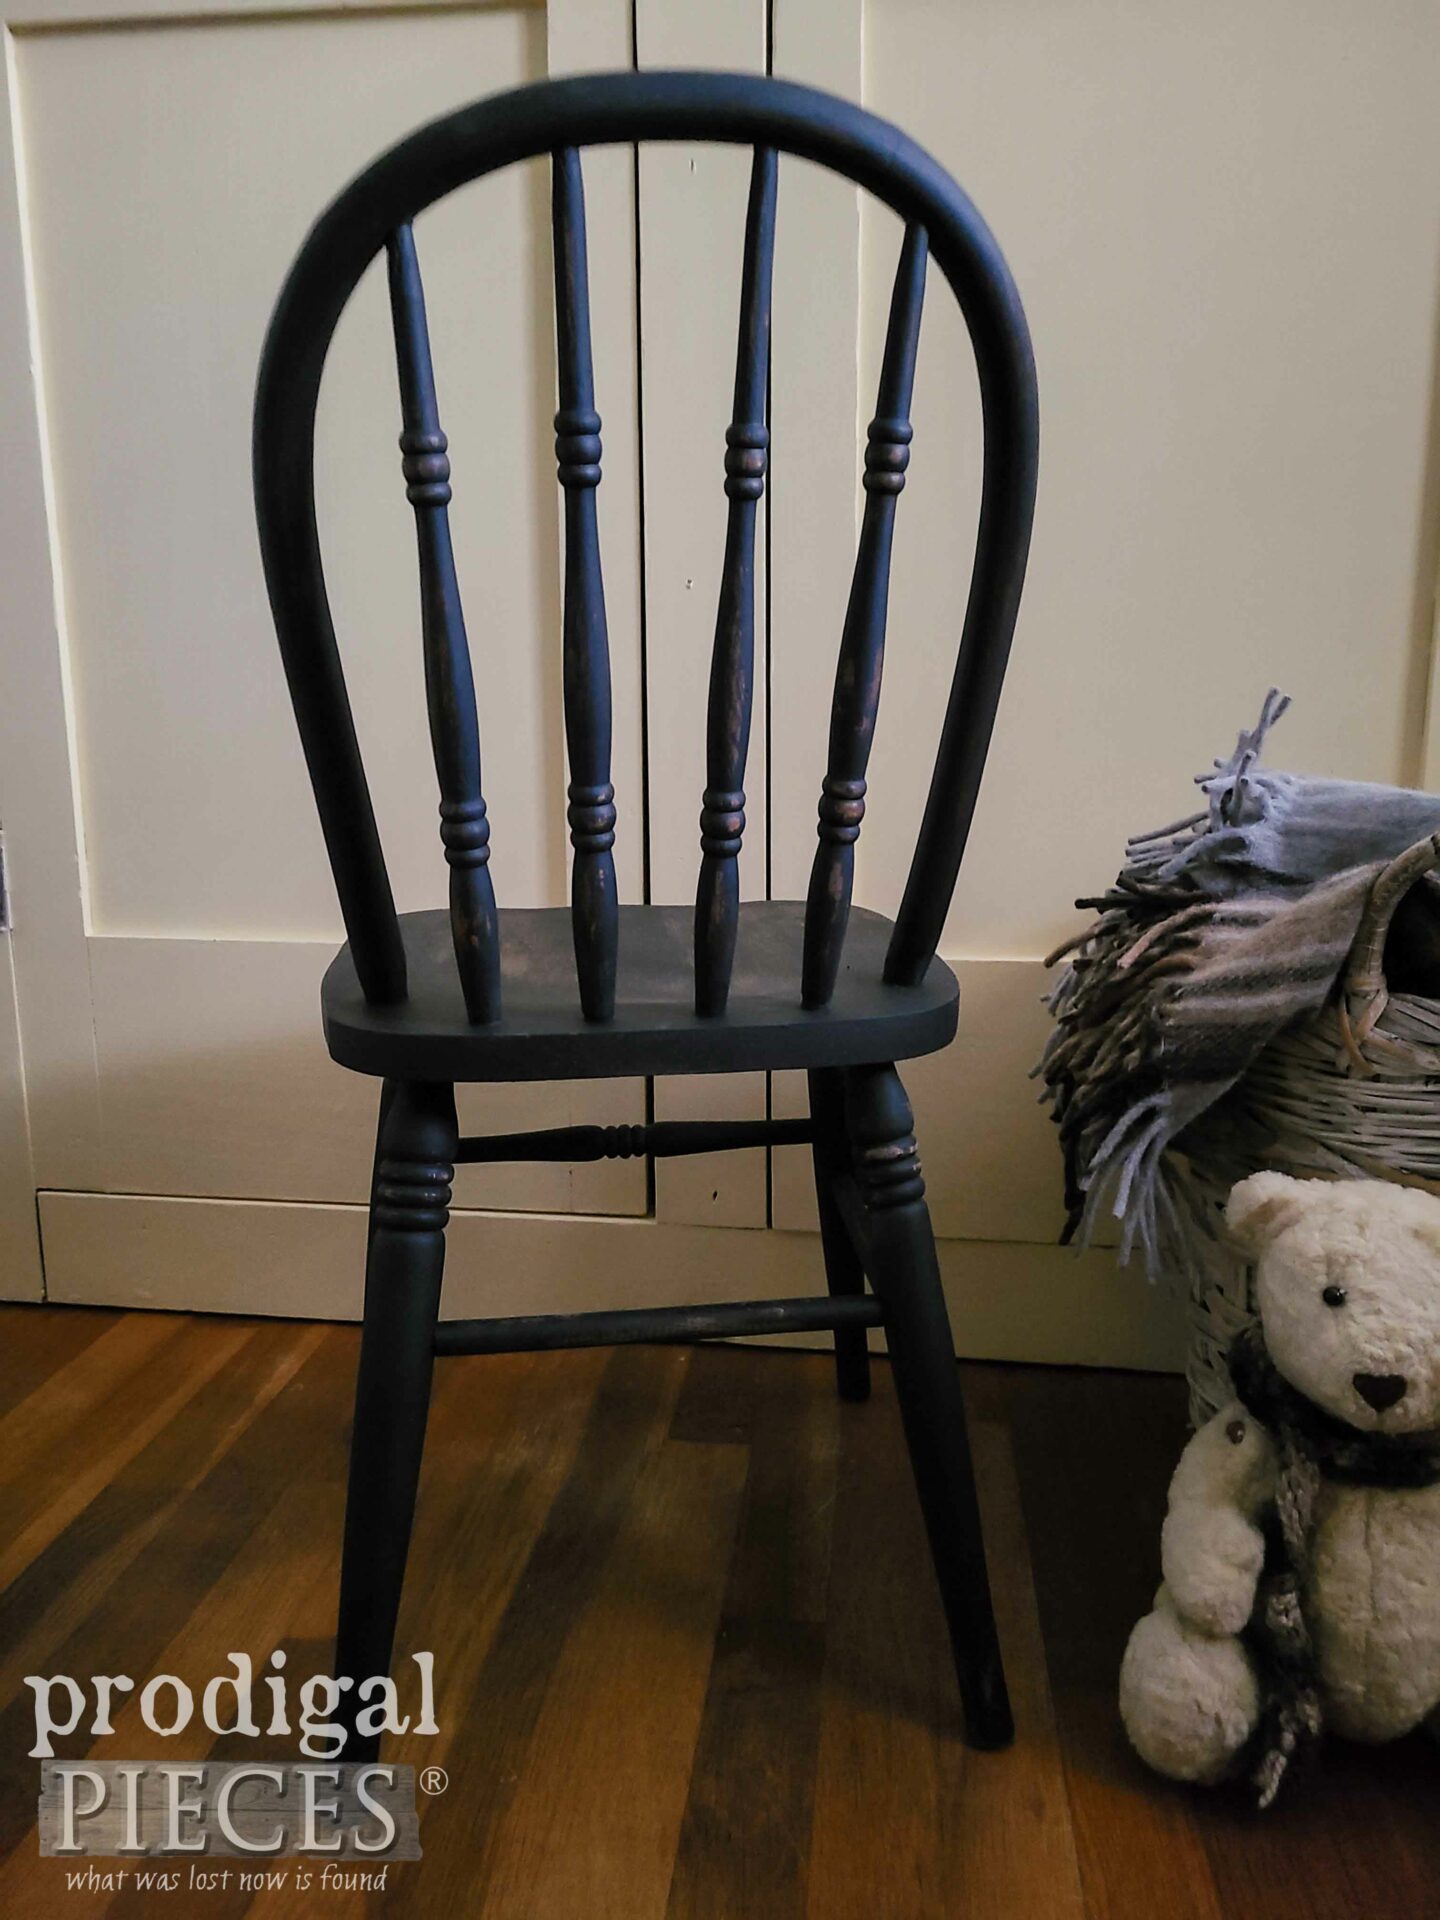 Back View of Windsor Style Chair for Kids | prodigalpieces.com #prodigalpieces